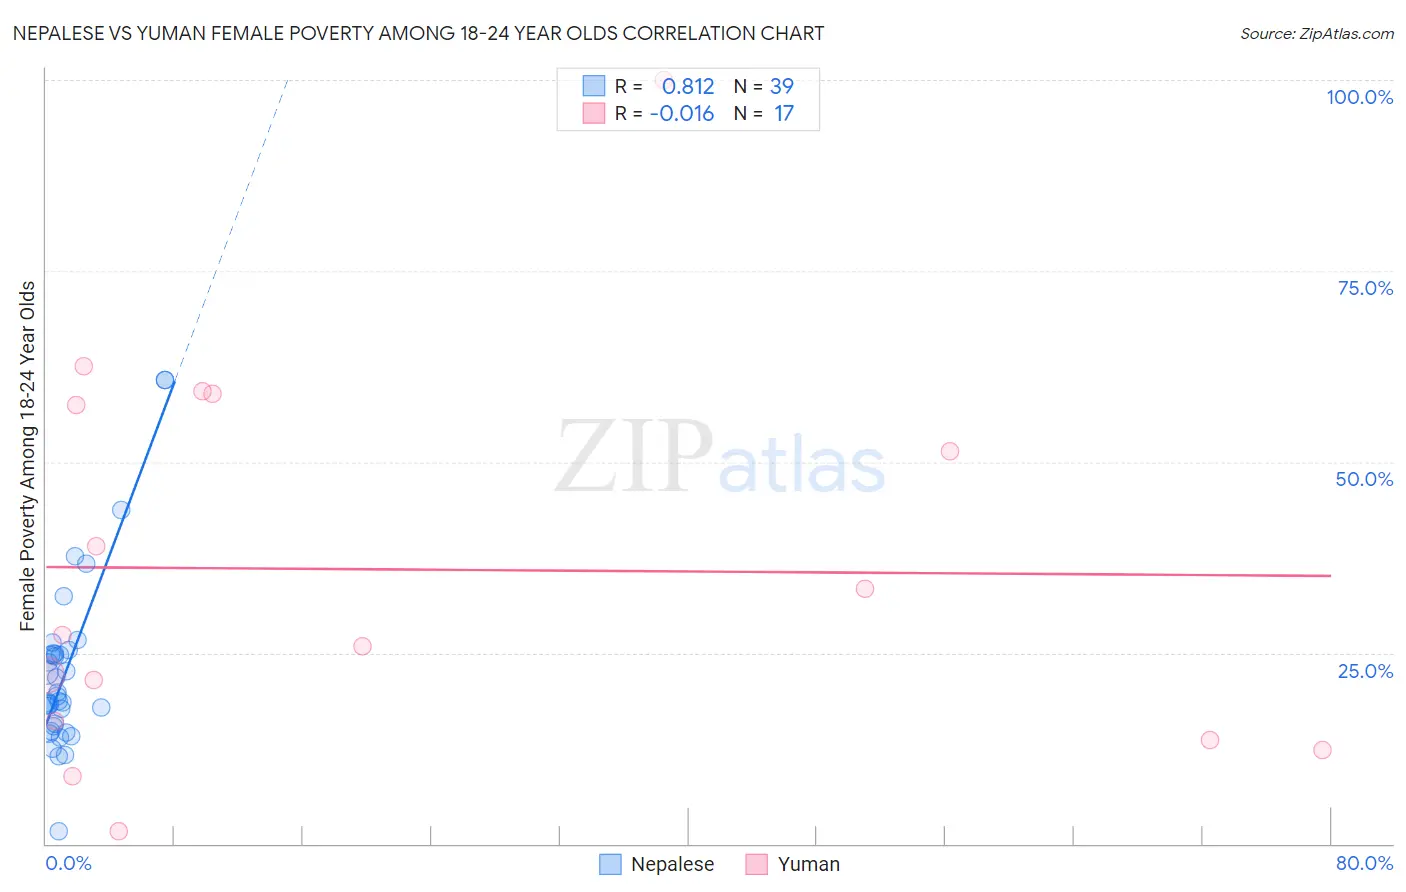 Nepalese vs Yuman Female Poverty Among 18-24 Year Olds